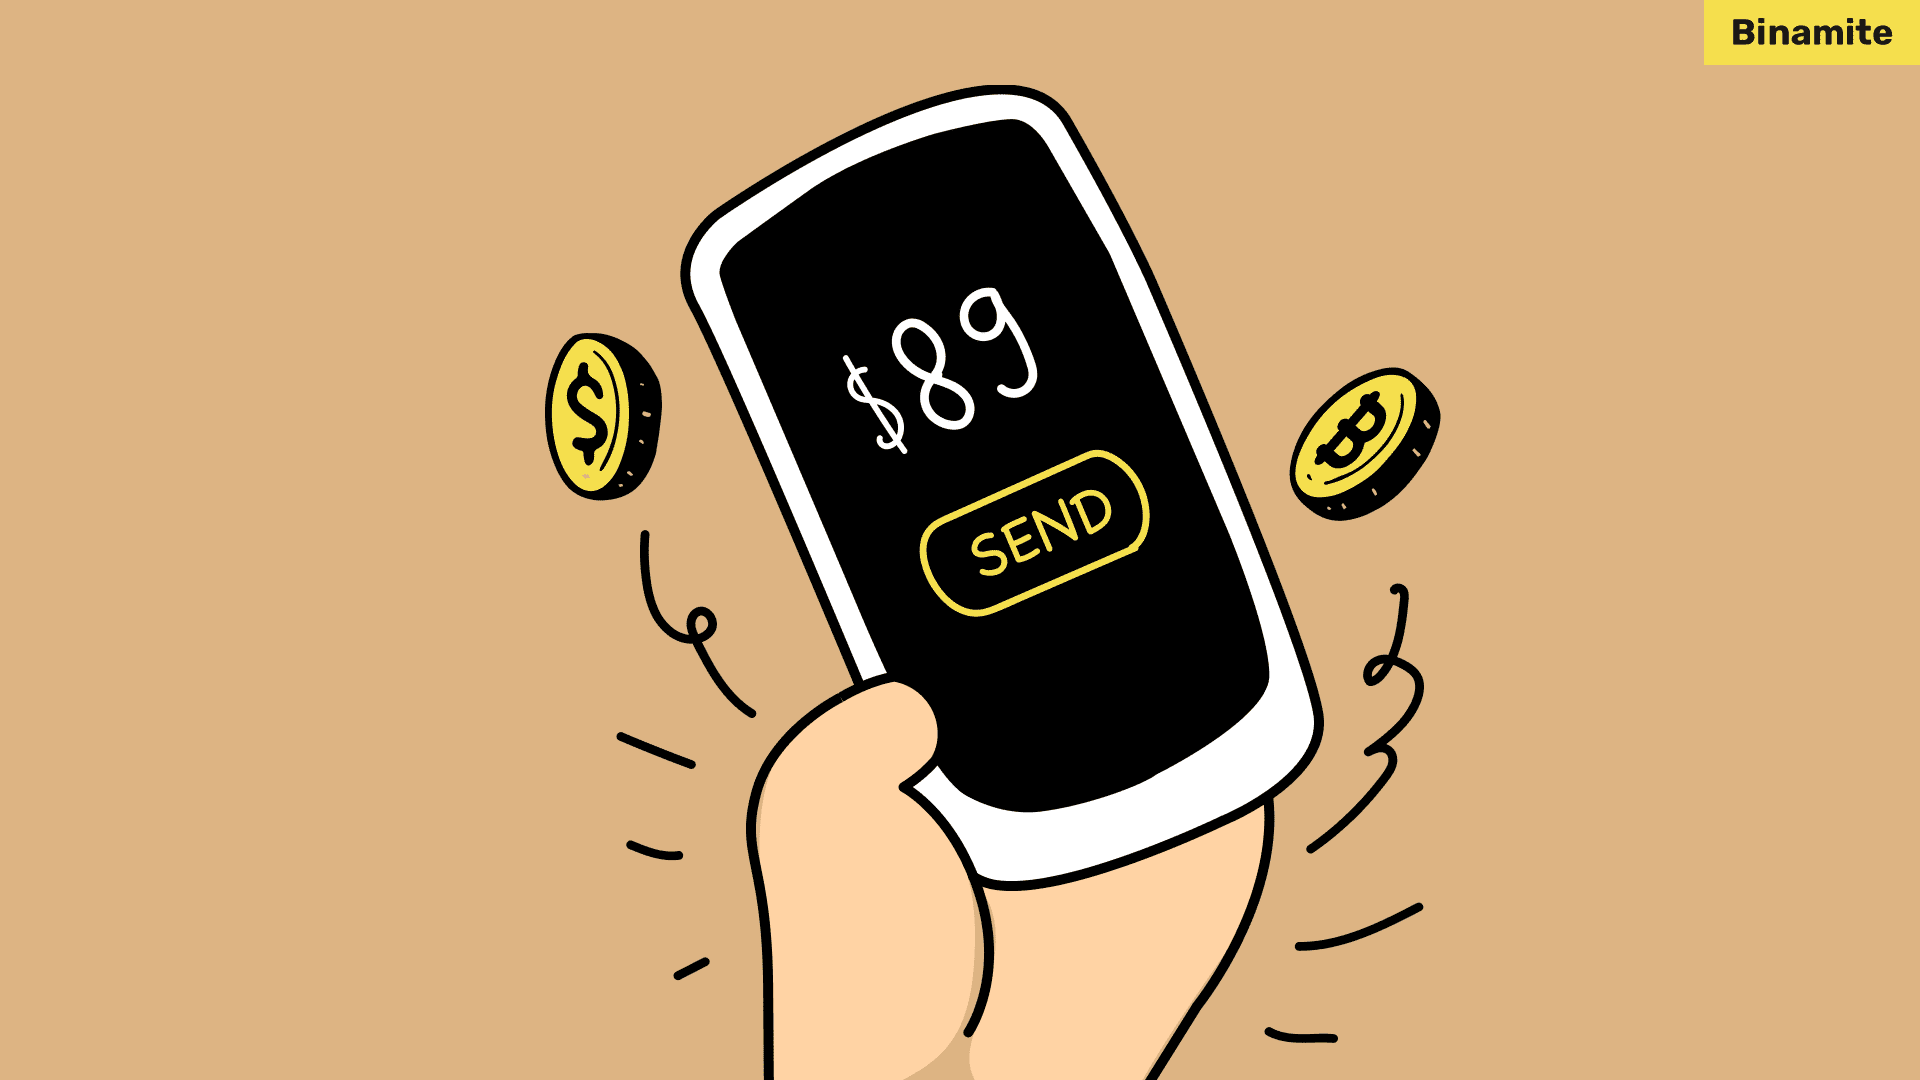 Send money using cryptocurrency